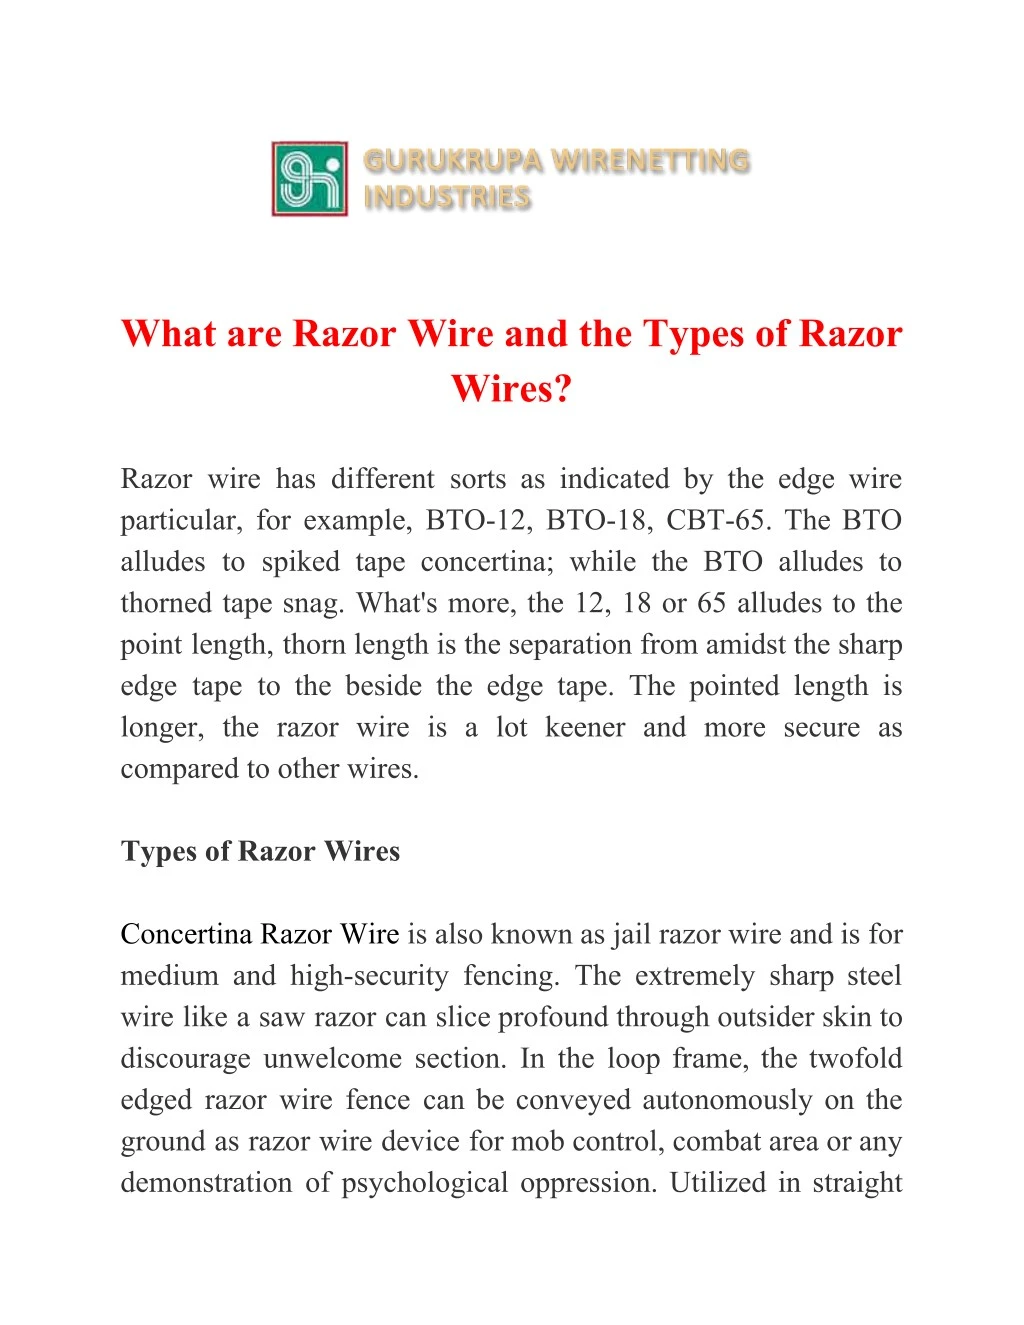 what are razor wire and the types of razor wires